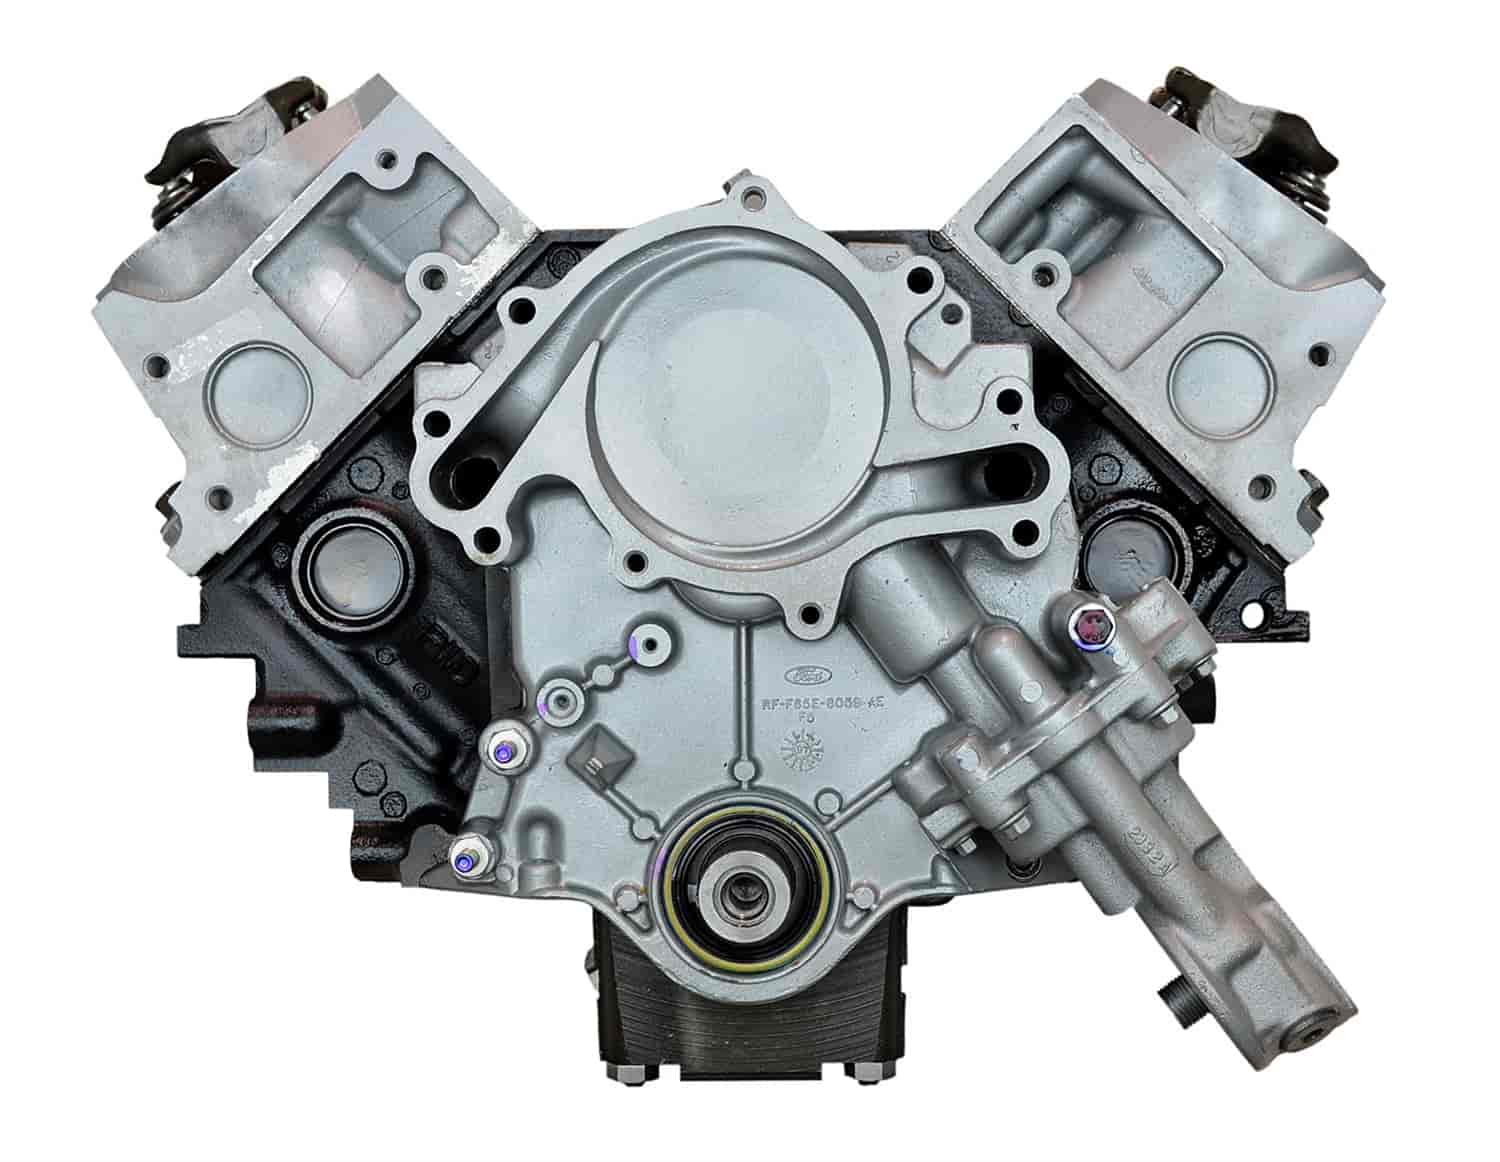 Remanufactured Crate Engine for 1996 Ford Windstar with 3.8L V6